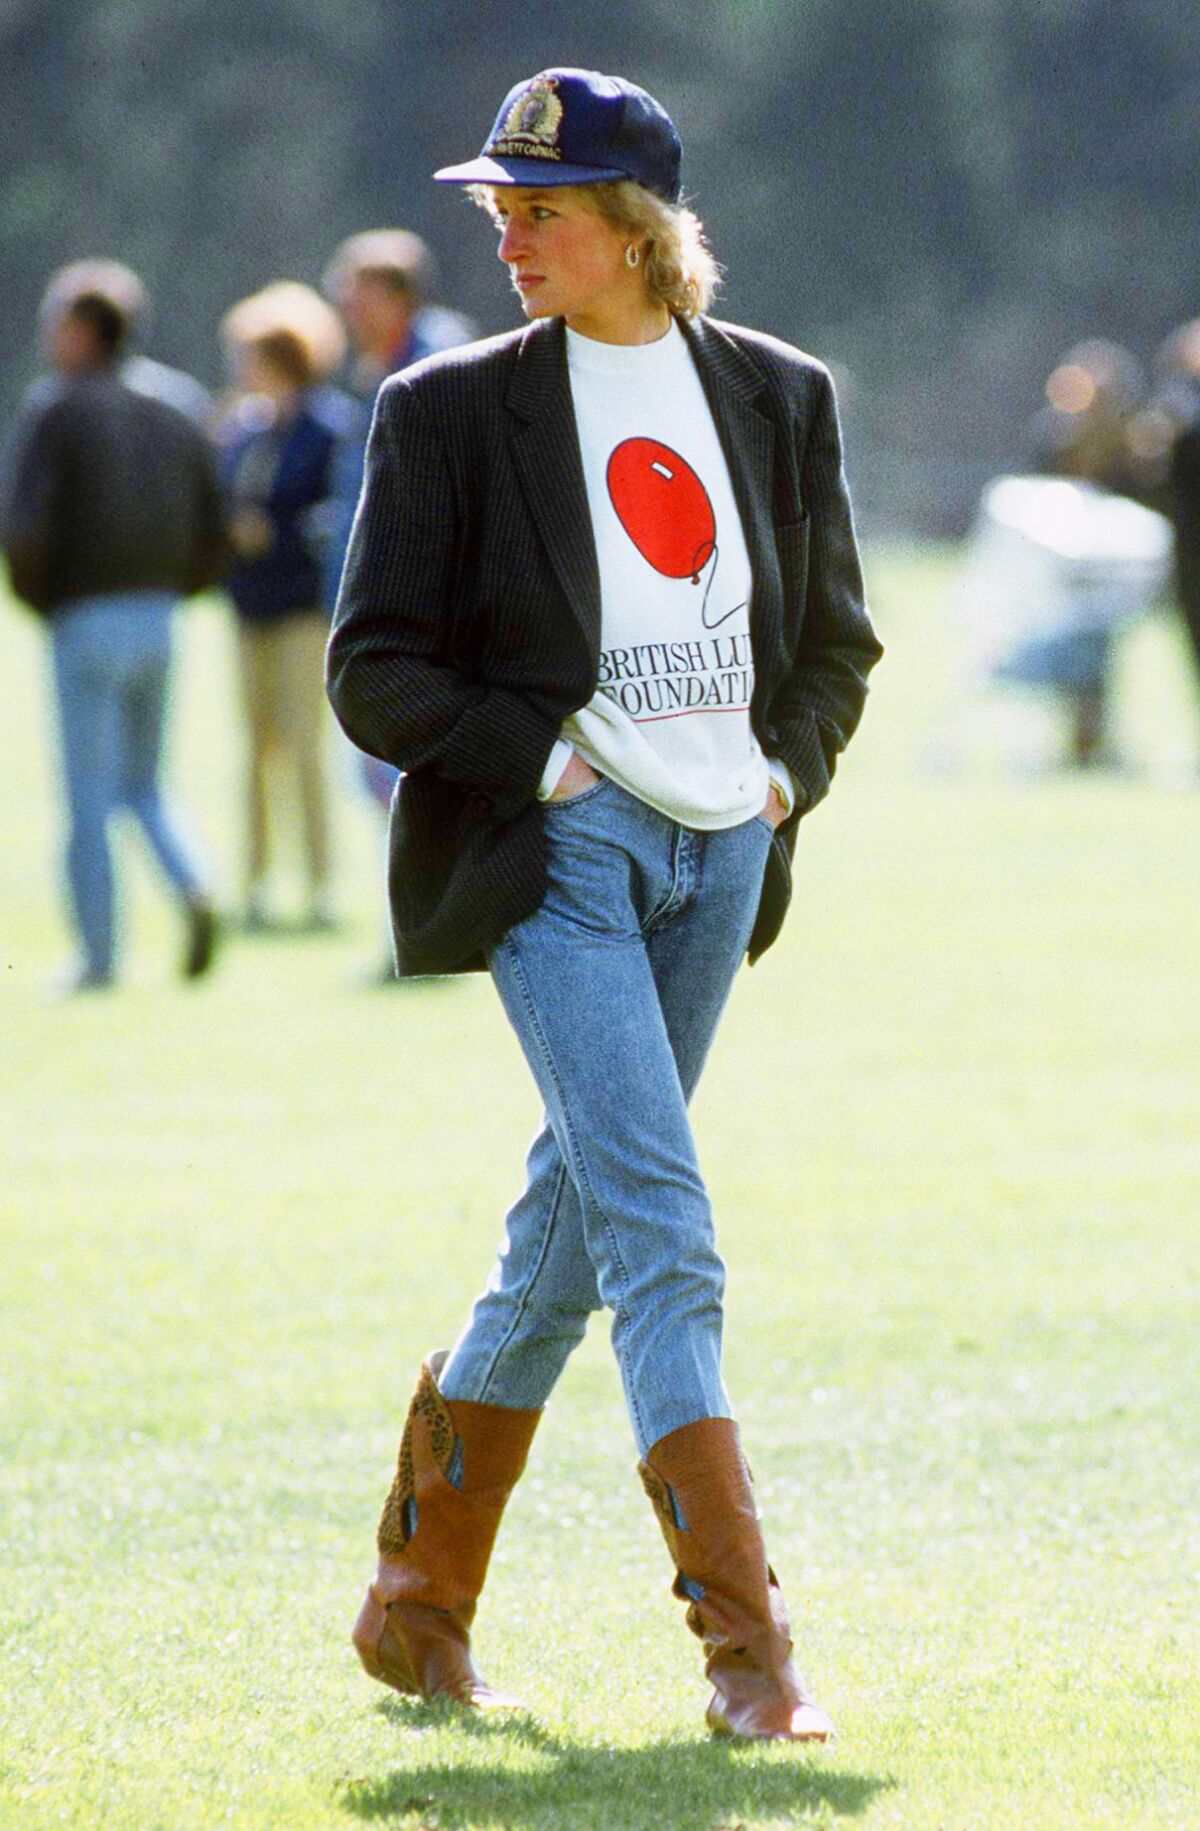 May 1988: At a polo match, Diana displays a carefully constructed casual style in a blazer, sweat shirt and baseball cap.